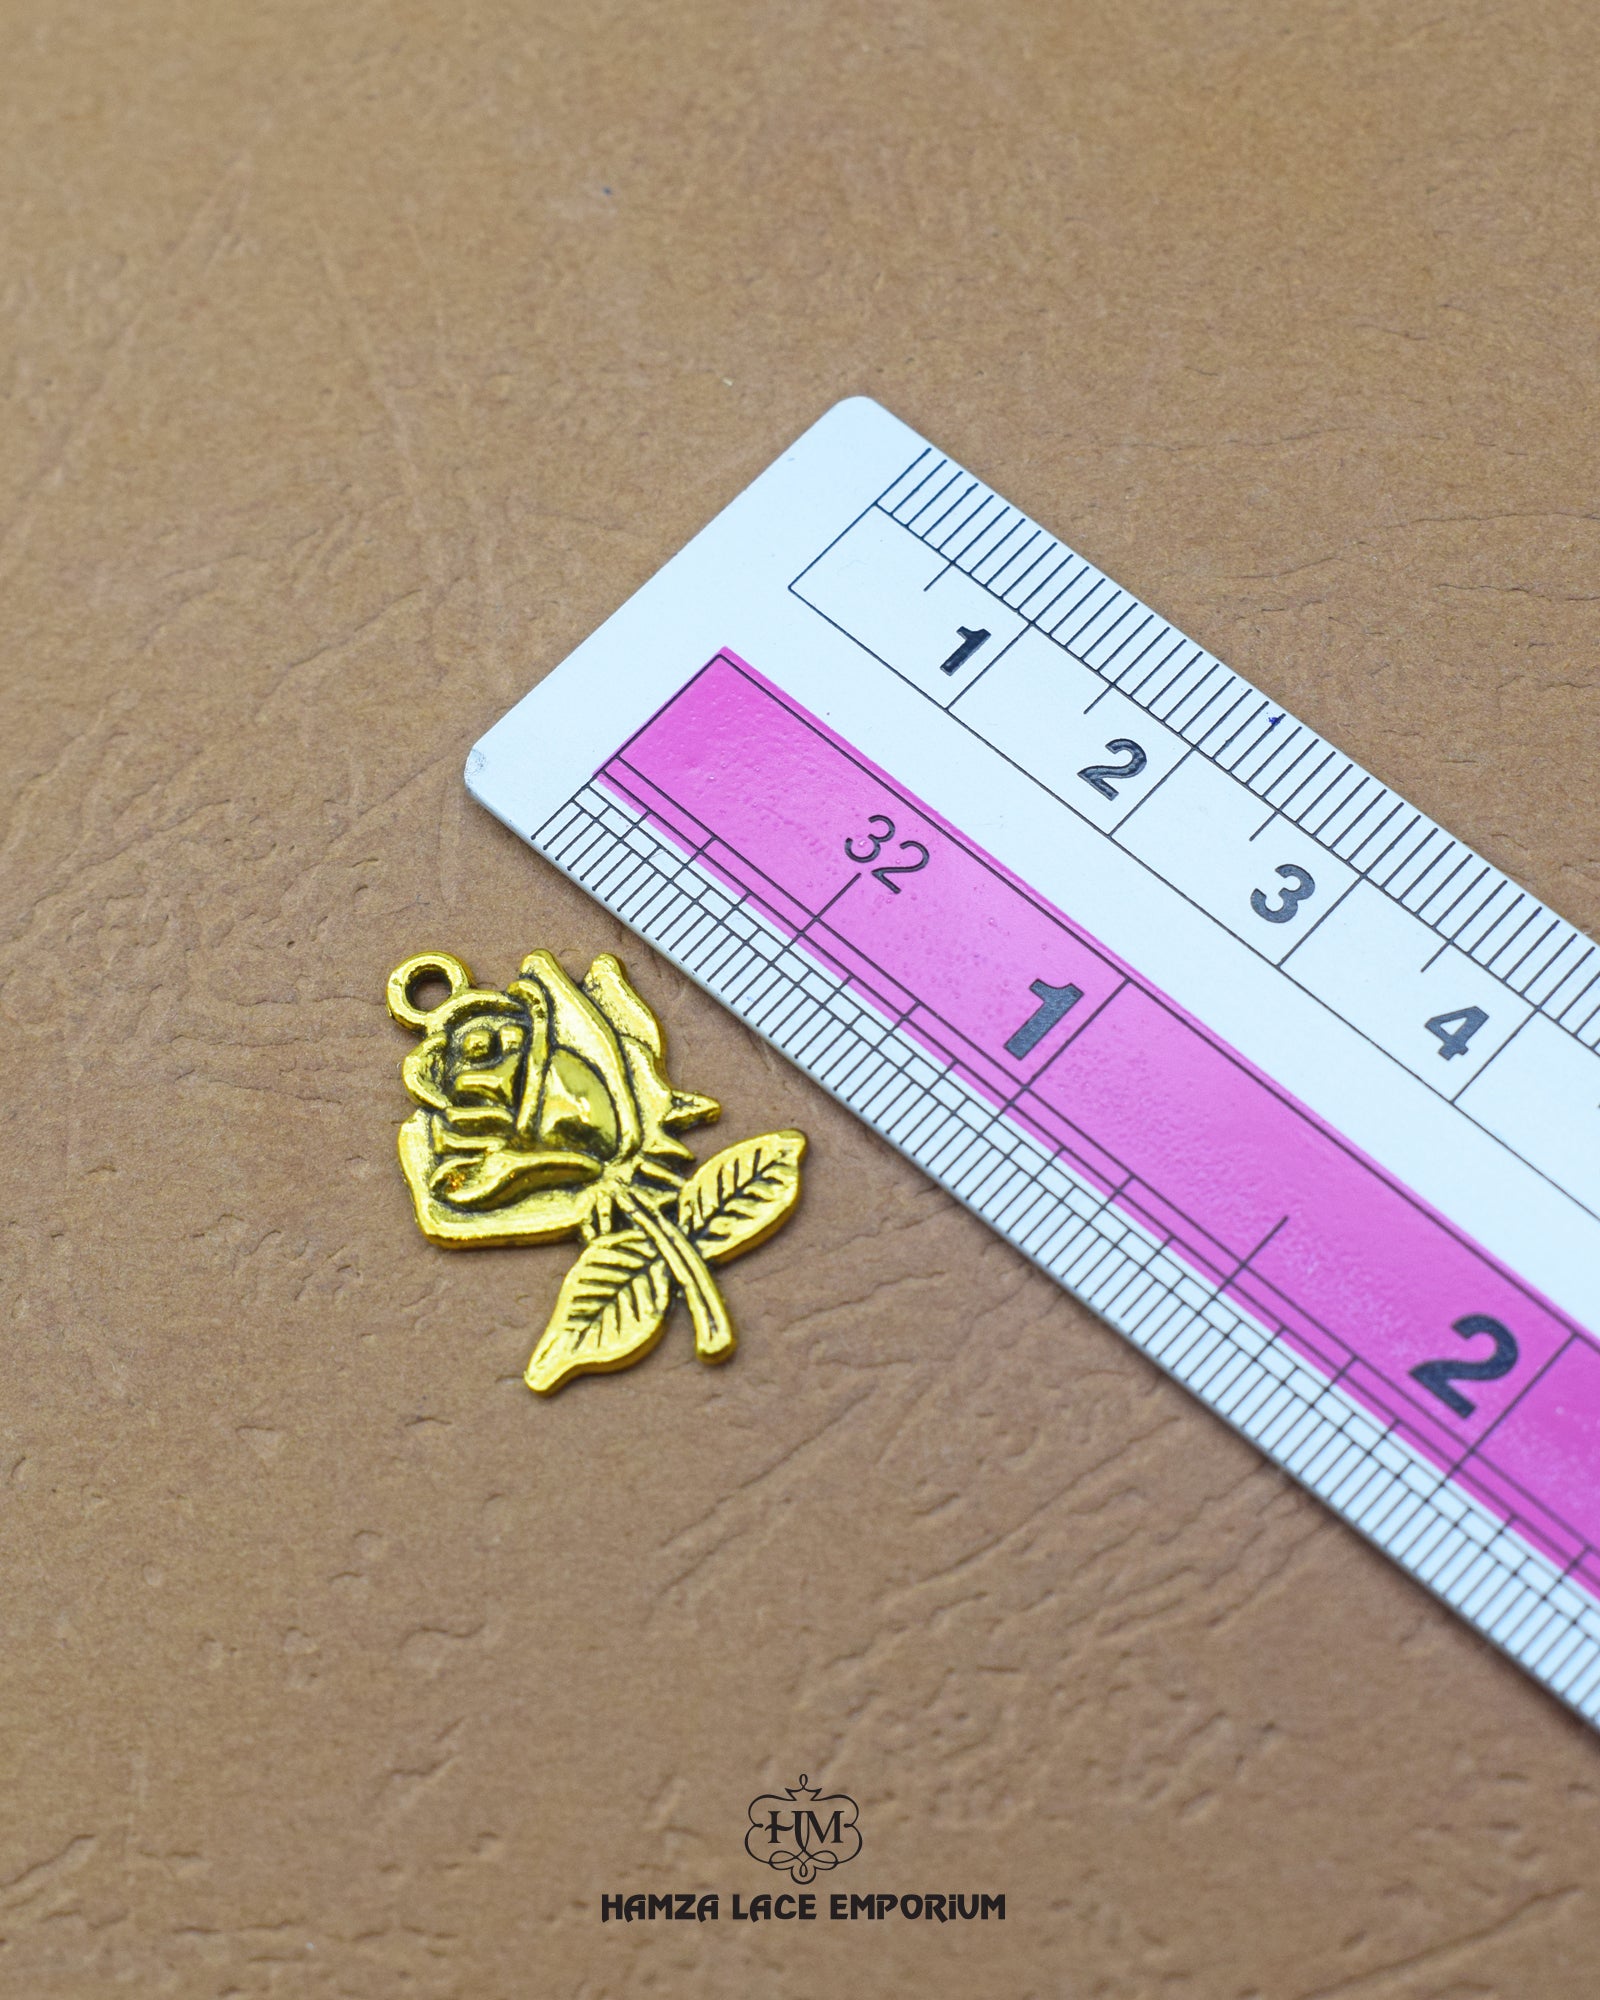 The size of the 'Rose Design Metal Button MA670' is indicated using a ruler.